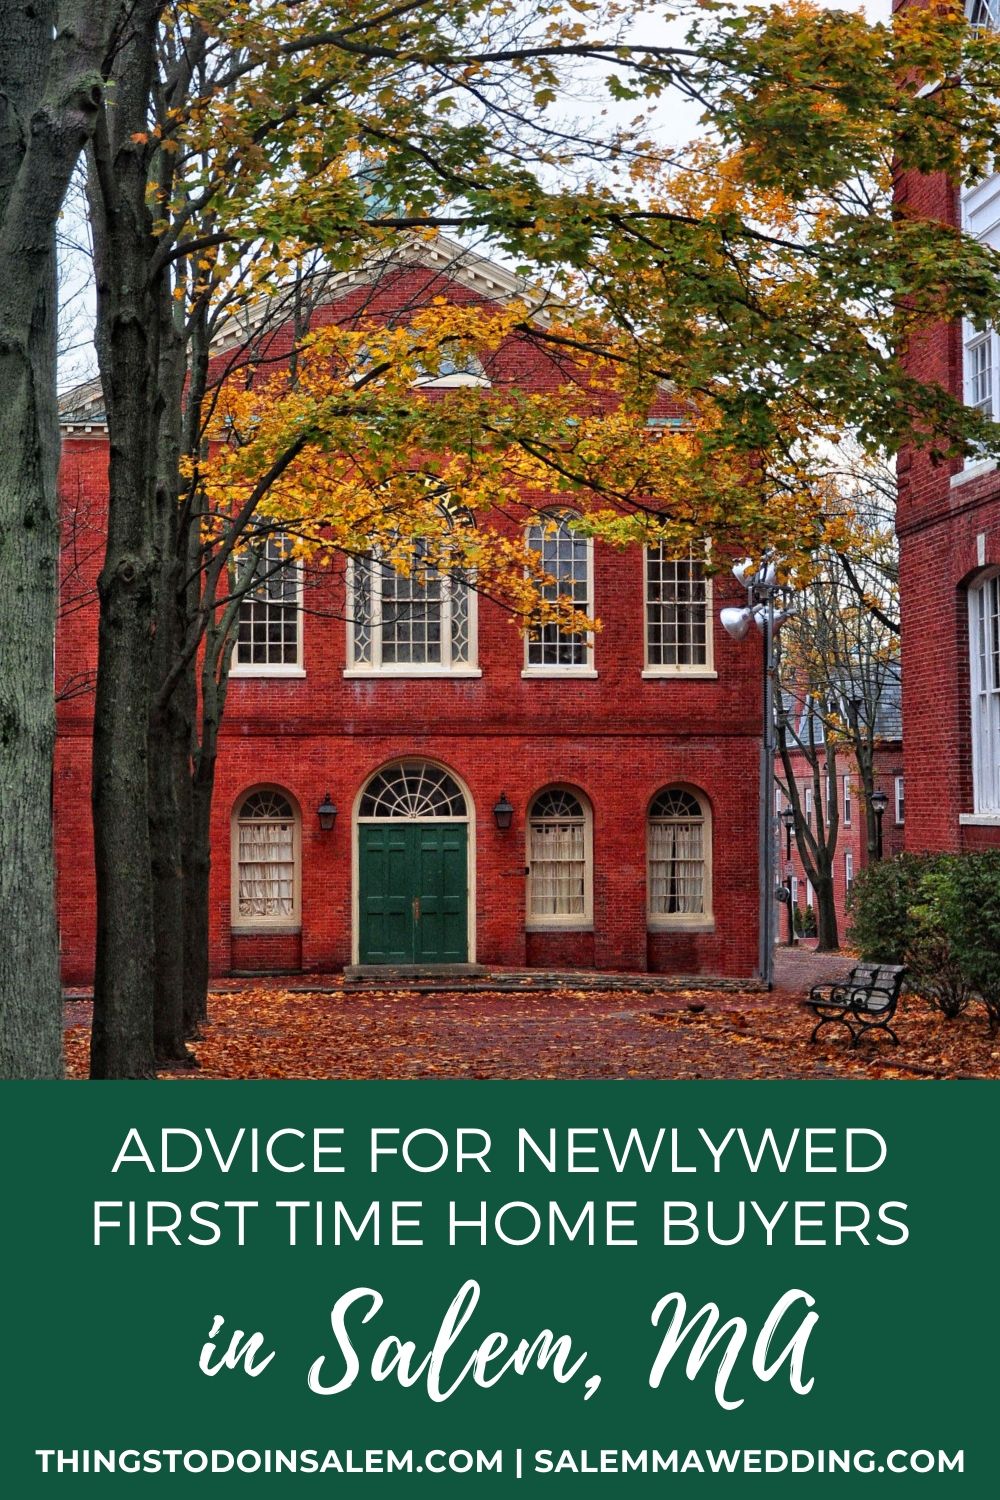 salem ma wedding, advice for newlywed first time home buyers in salem ma